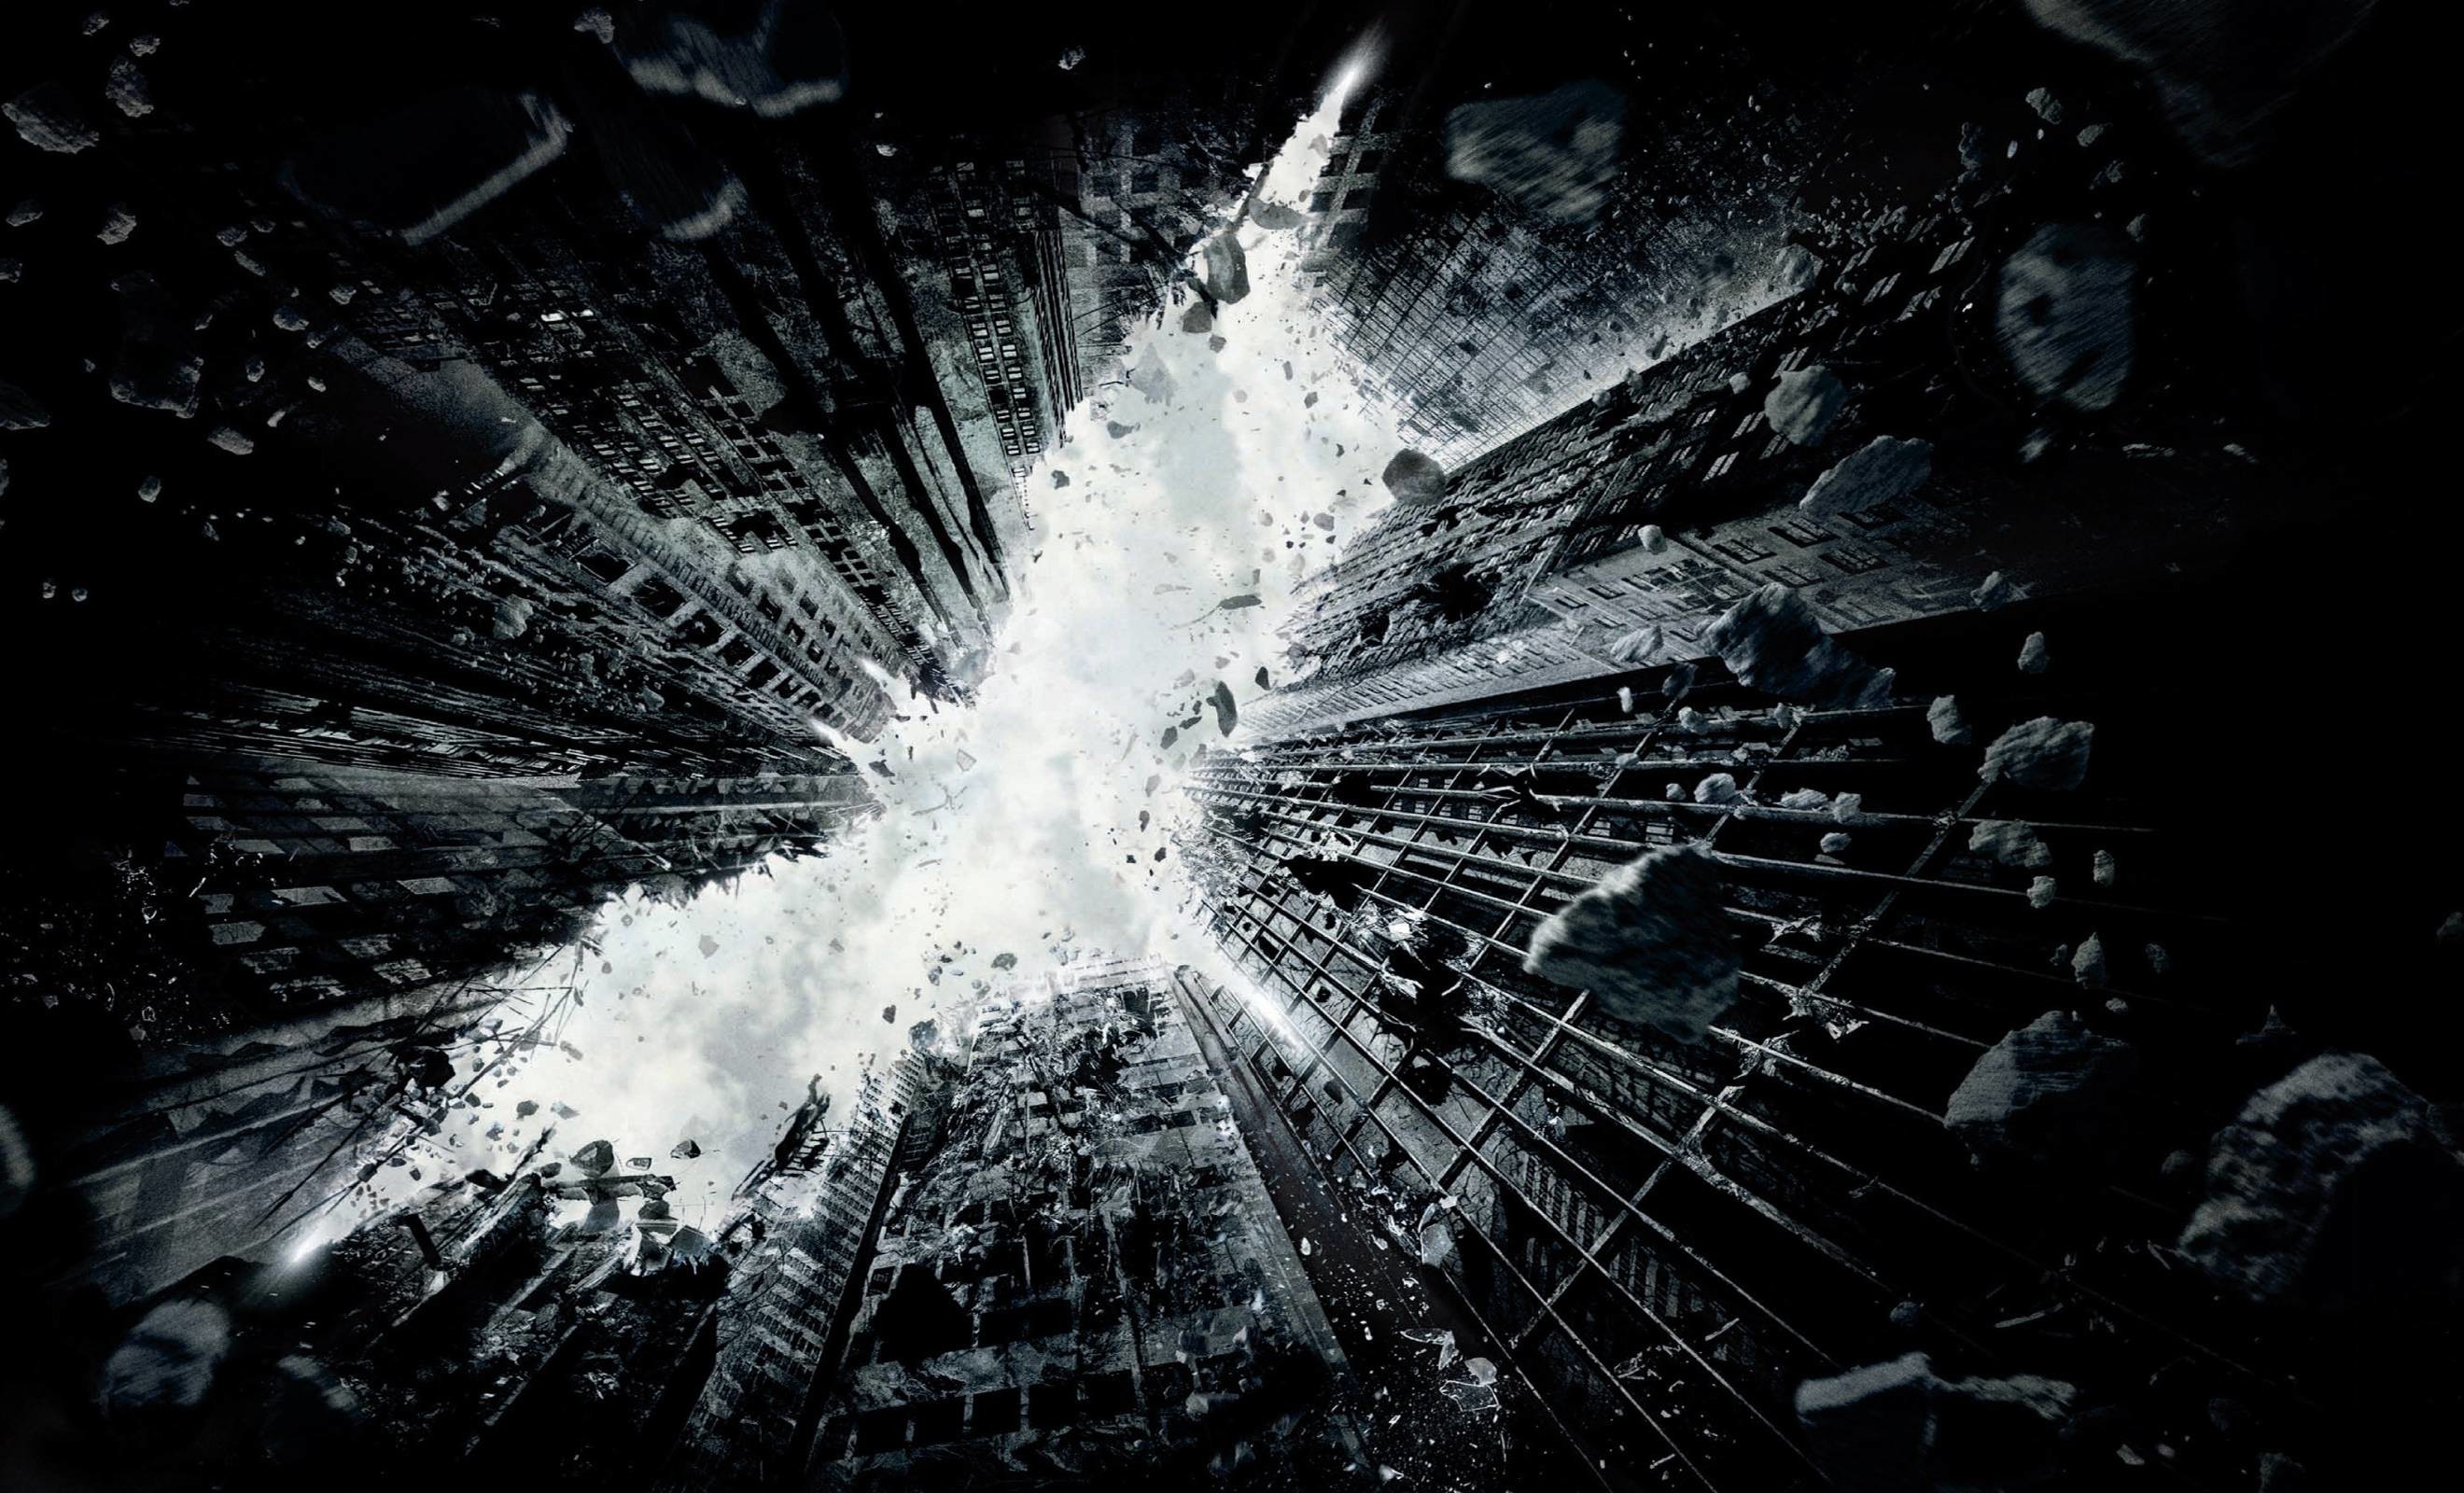 The Dark Knight Rises HD Wallpapers Desktop Backgrounds Phot 63860